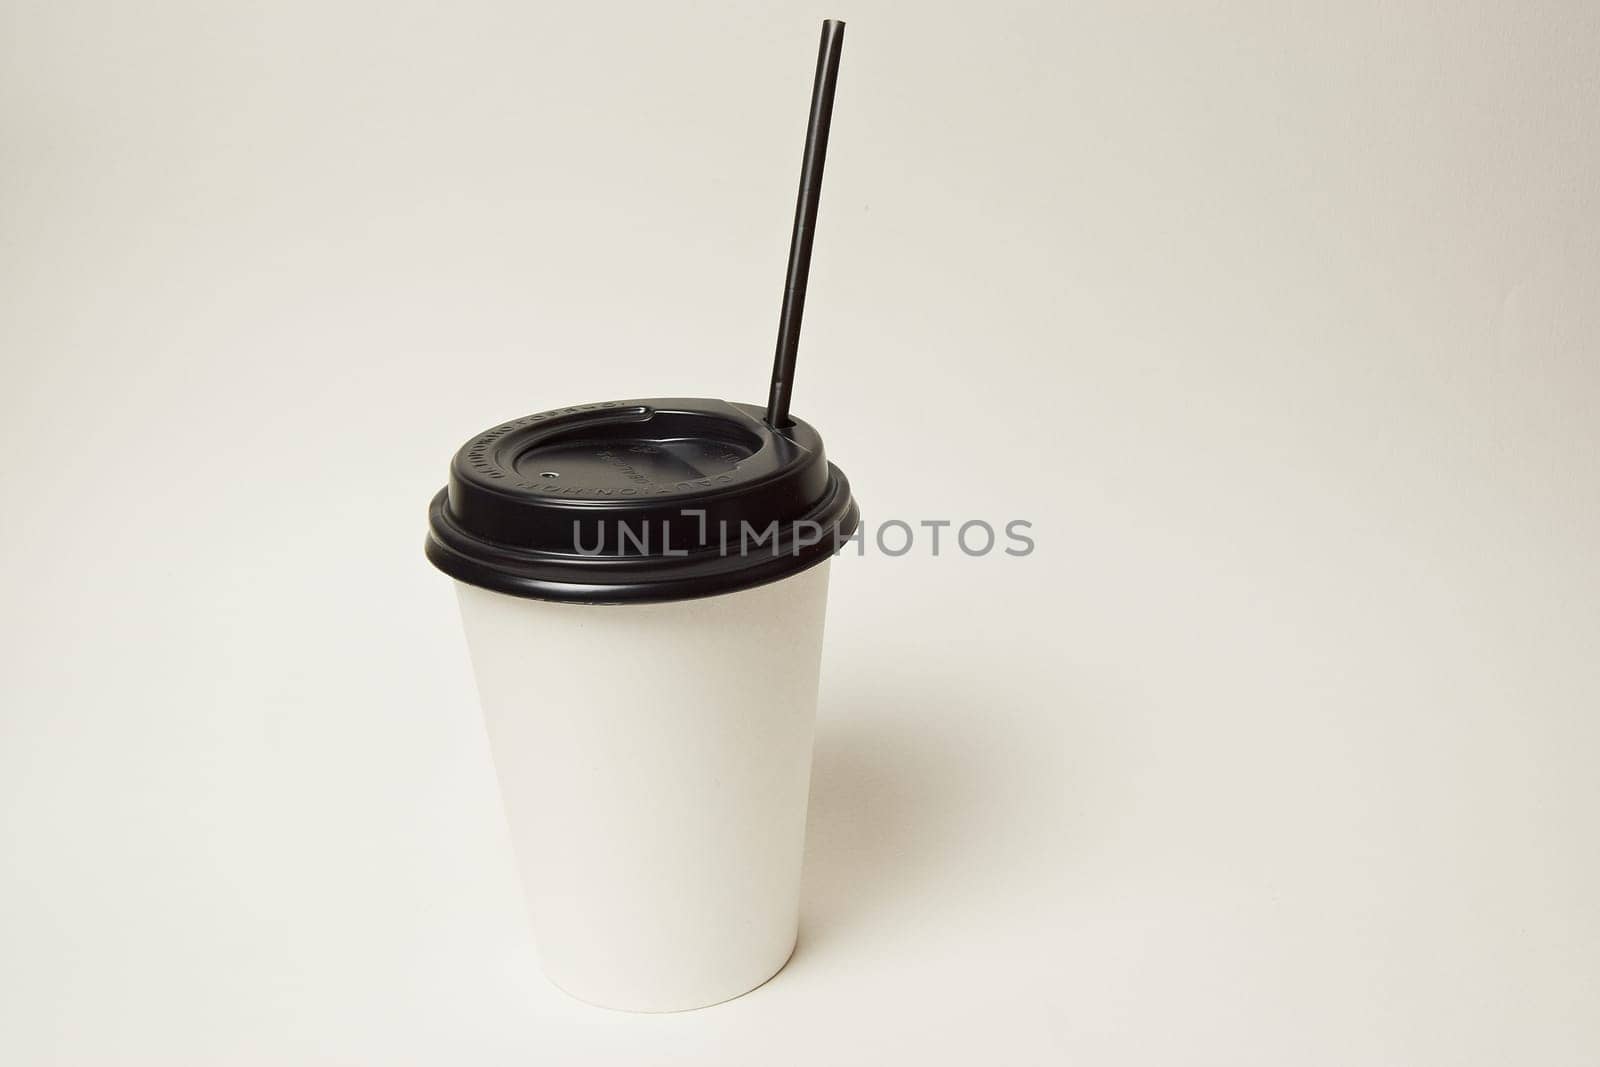 Paper coffee container with black lid and coffee beans on a white background white coffee paper cup with black lid takeaway coffee